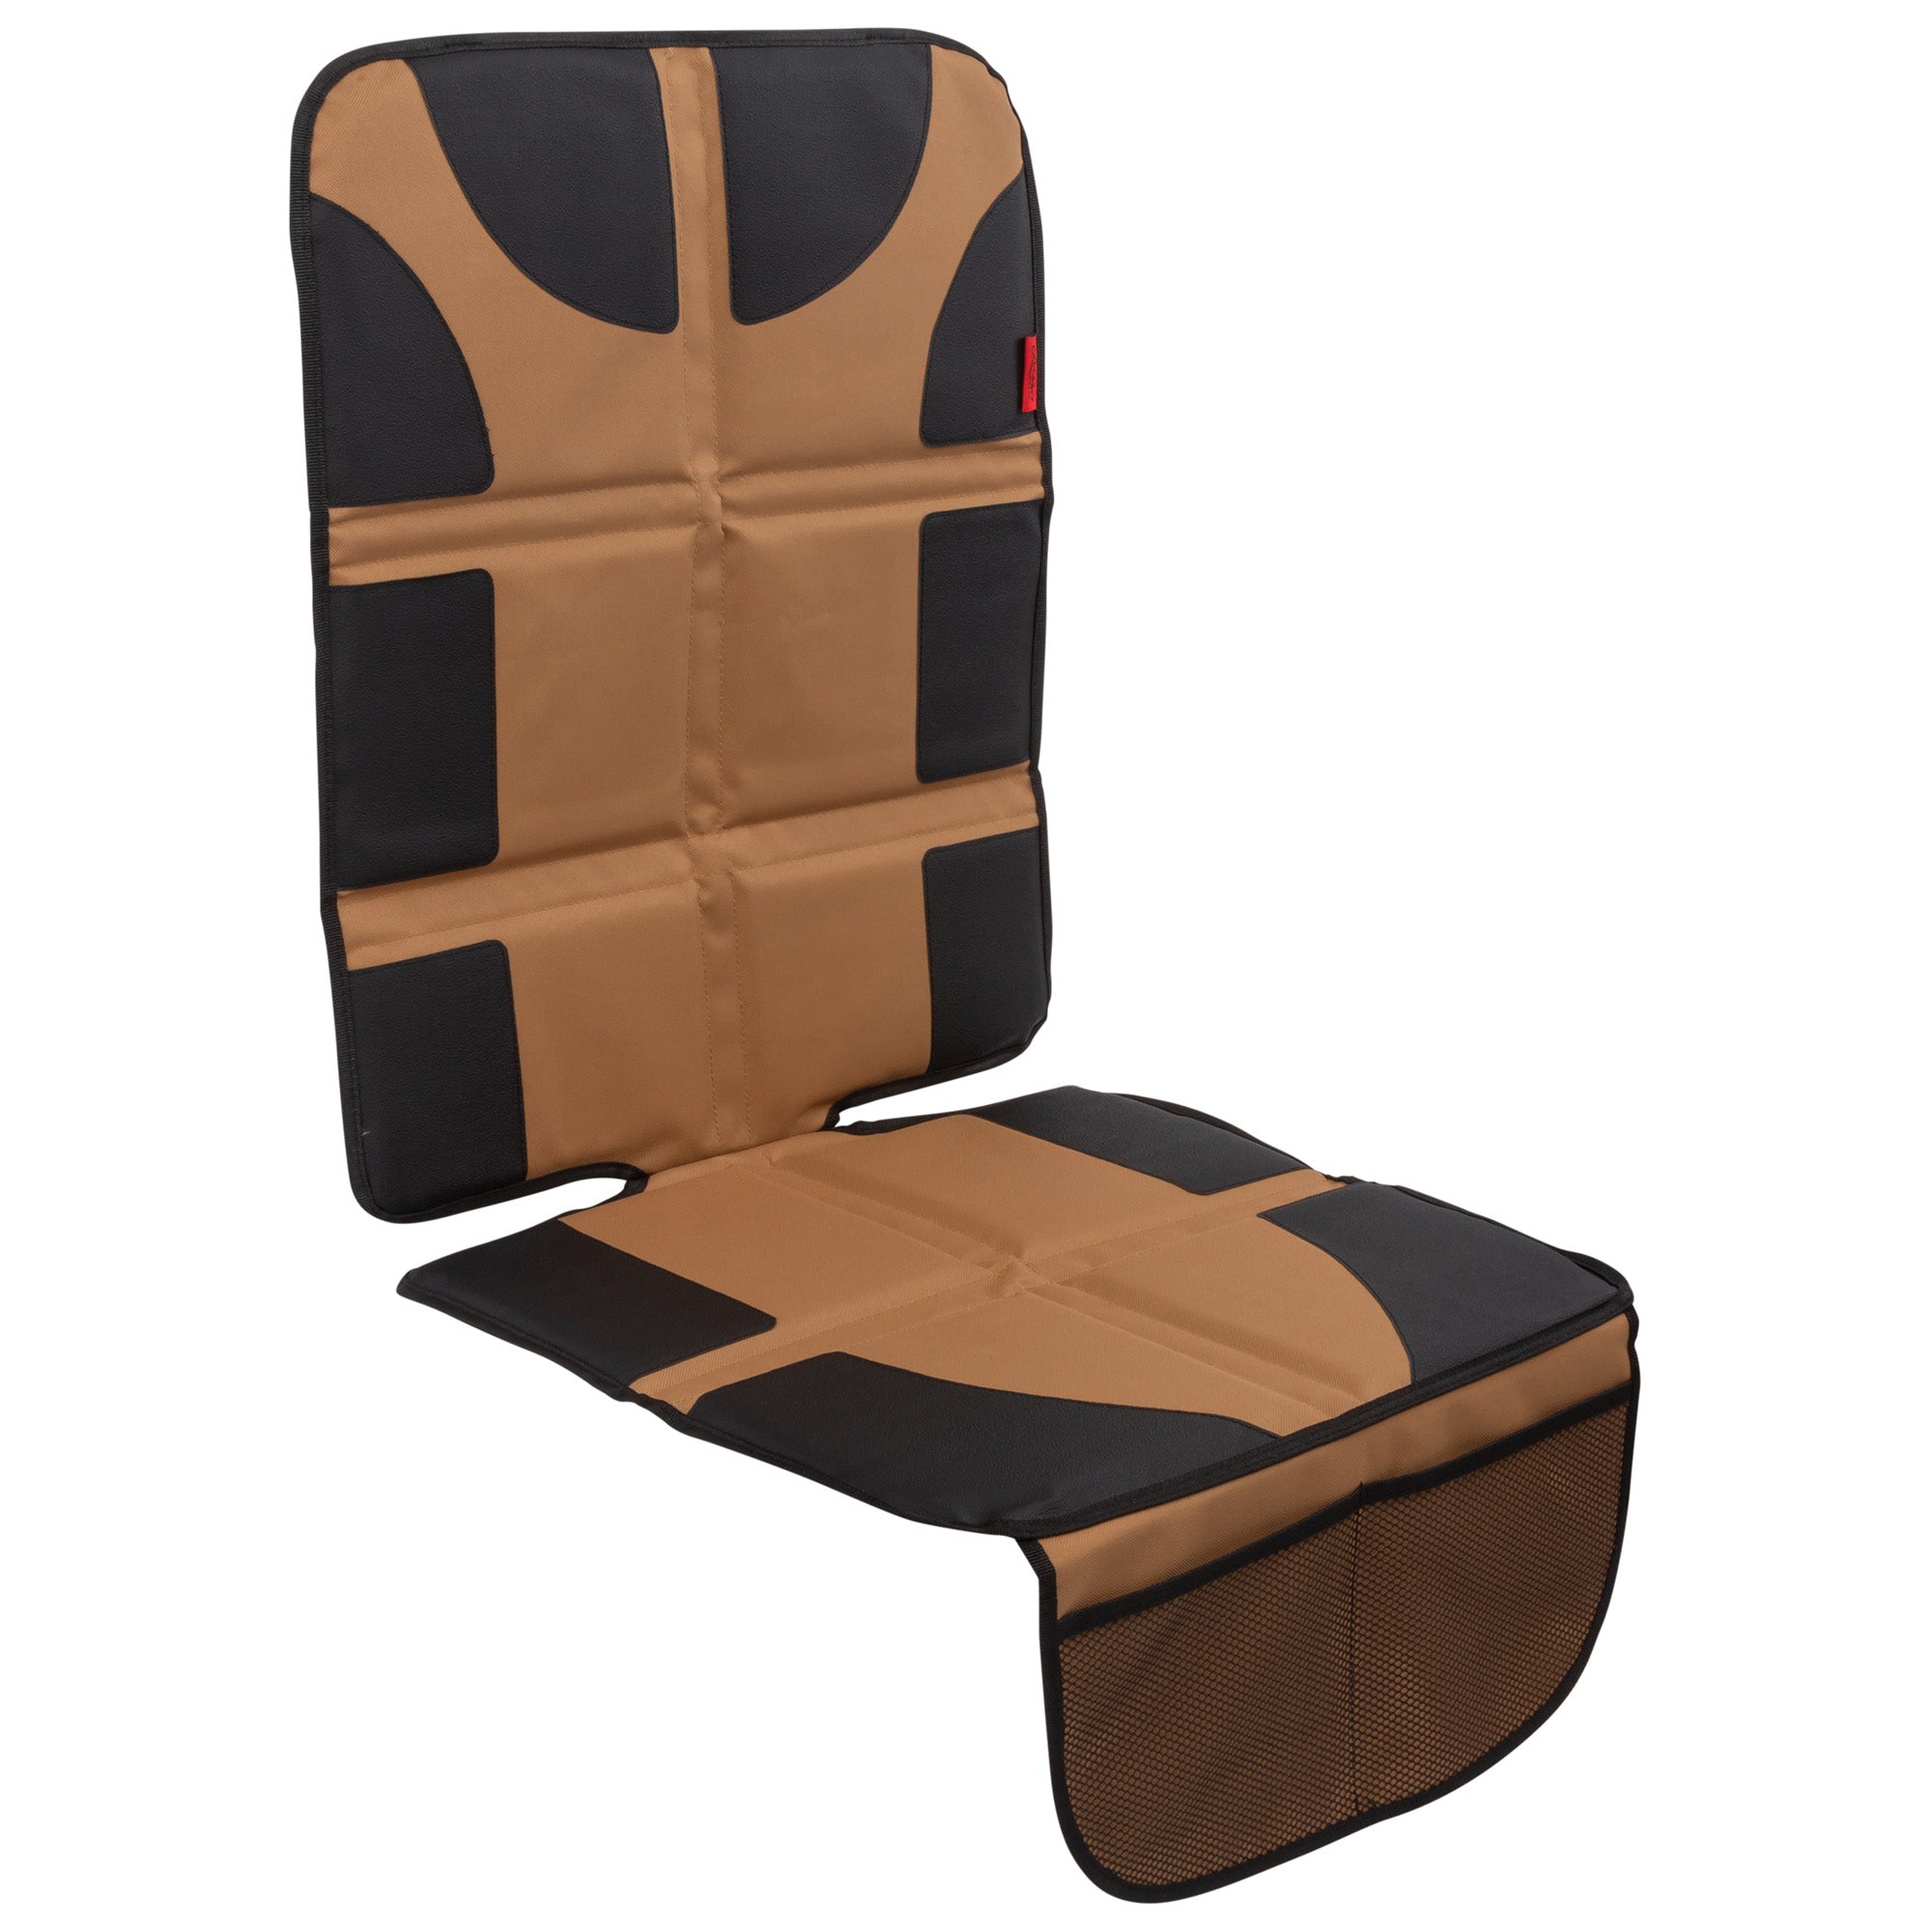 Tan / For Child Car Seat